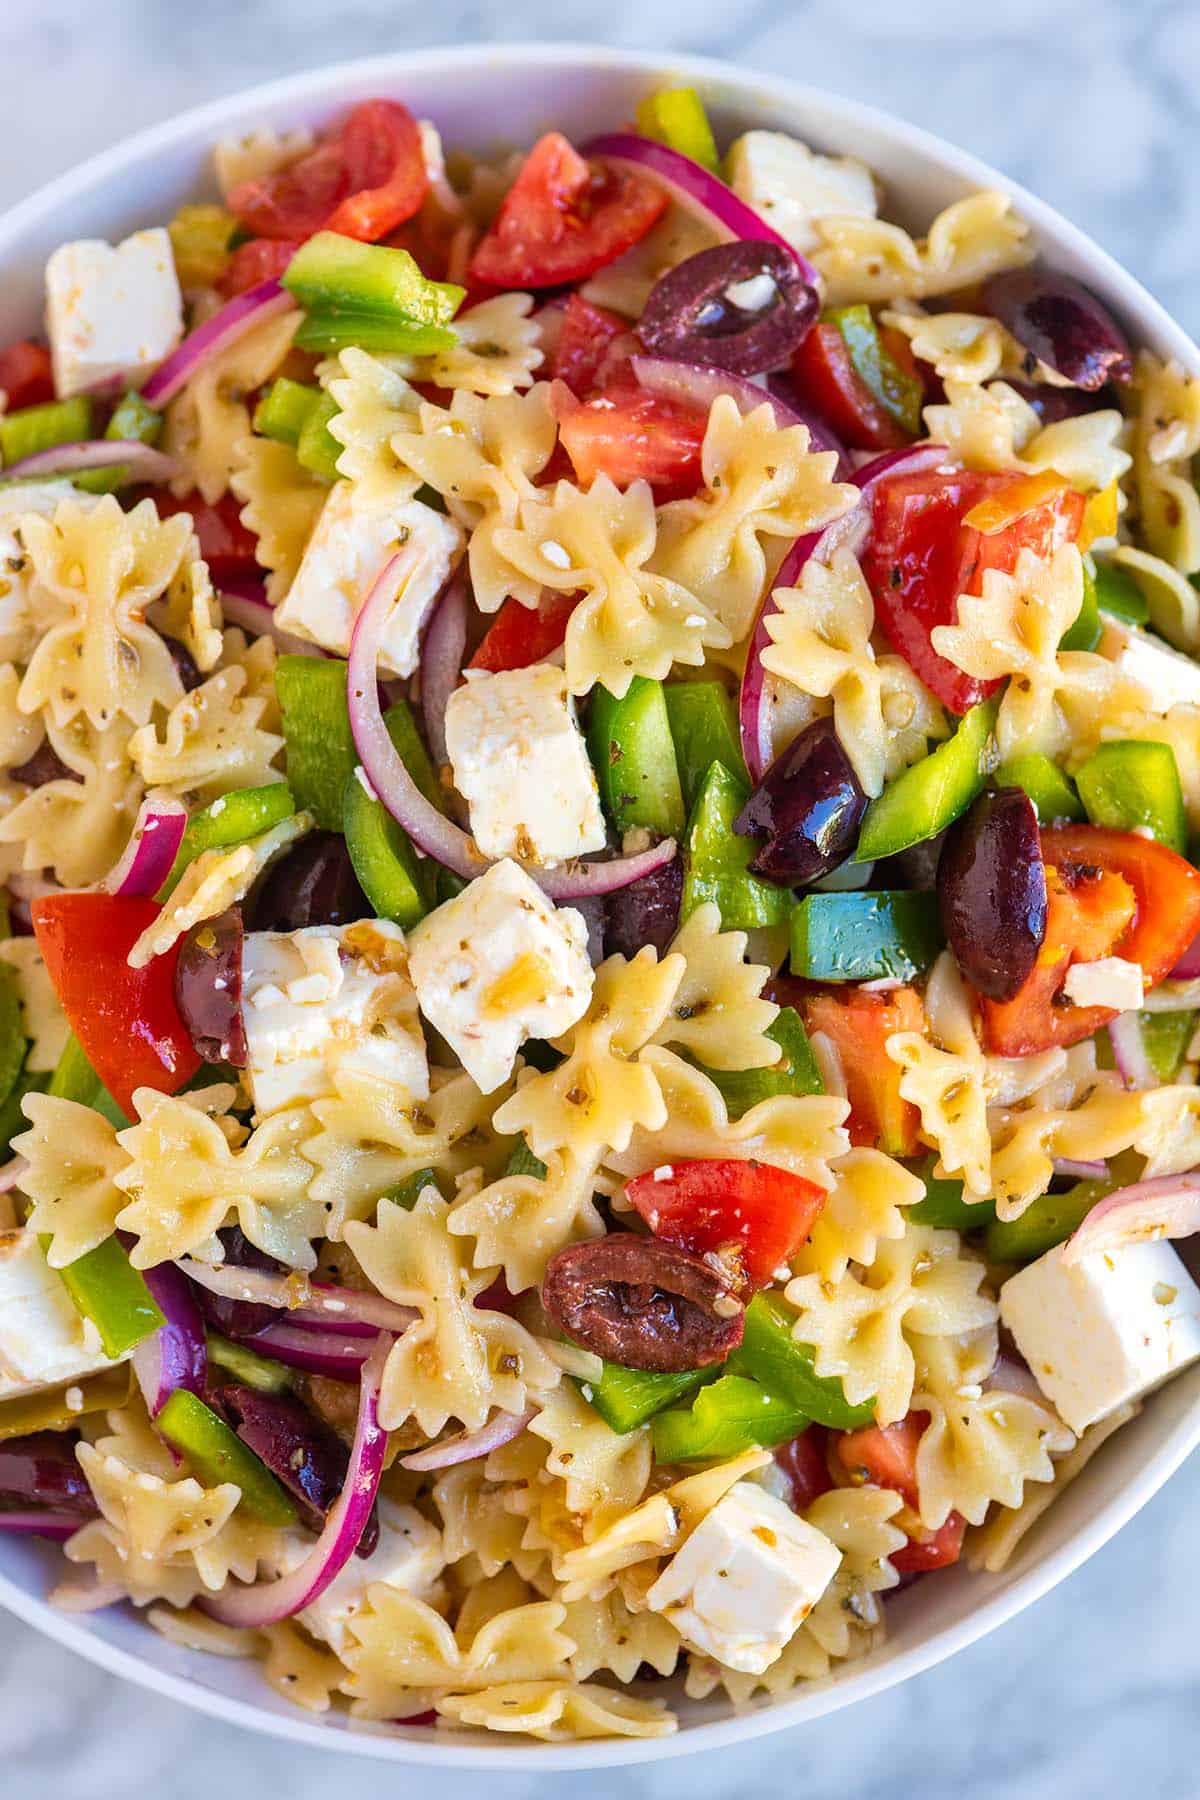 Greek Pasta Salad with feta, olives, tomatoes, and red onion.